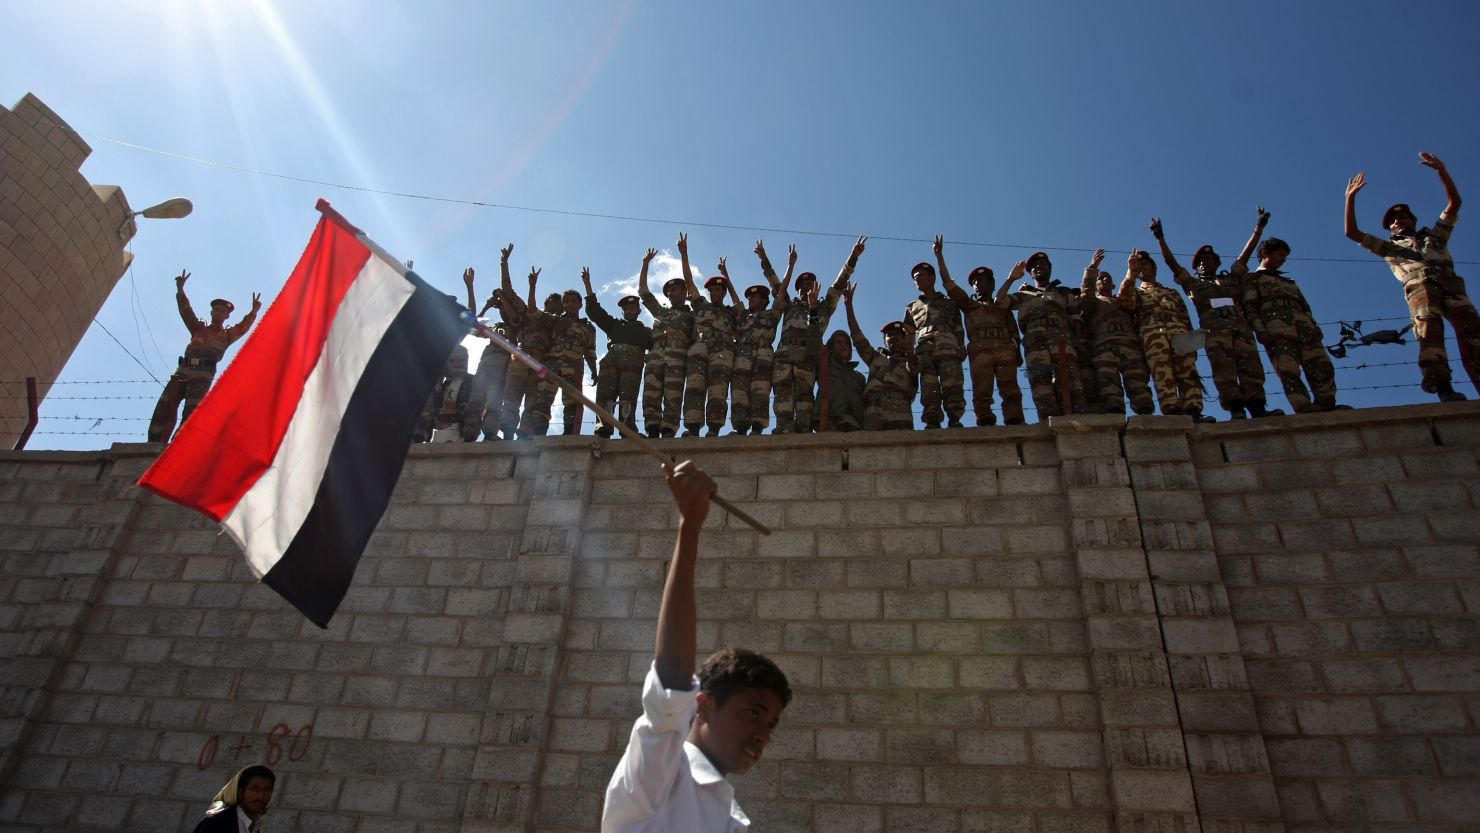 Dissident Yemeni protesters shout slogans as a protestor waves a Yemeni flag in Sanaa on Saturday.